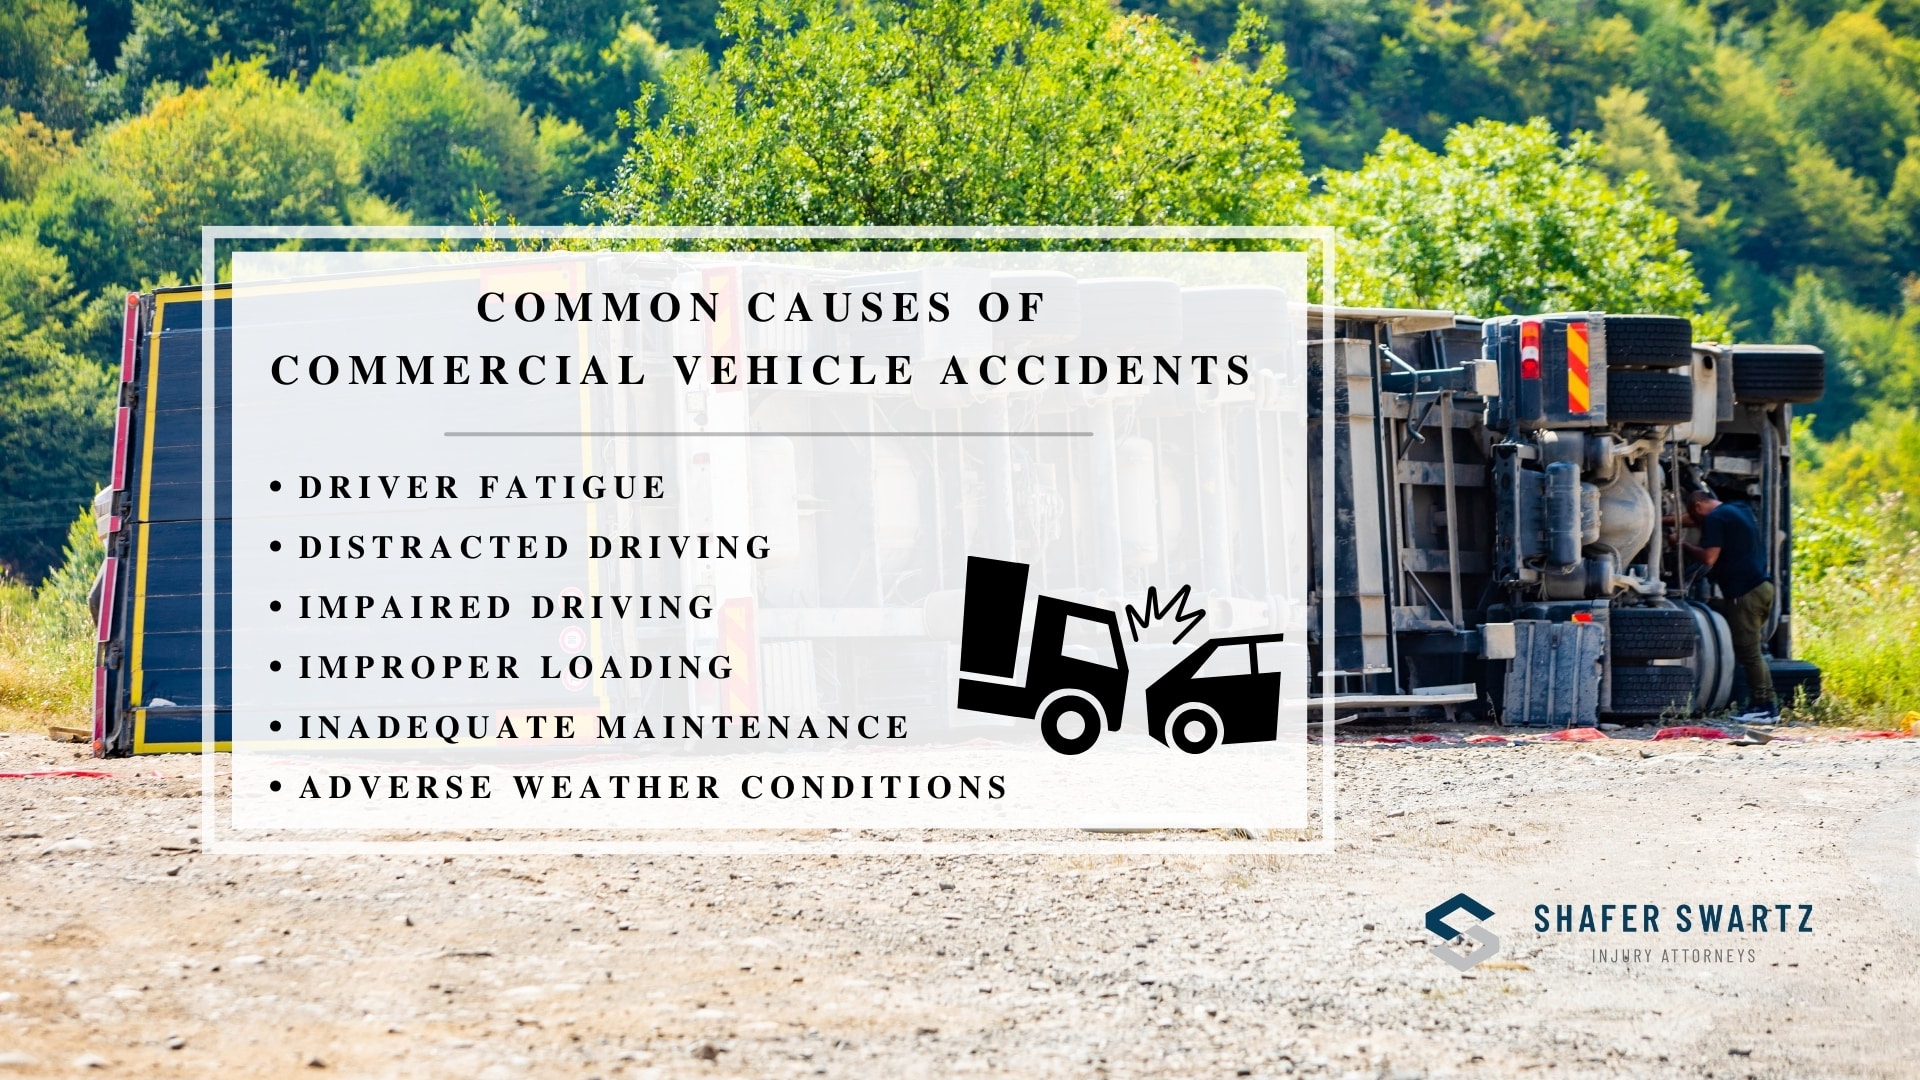 Infographic image of common causes of commercial vehicle accidents